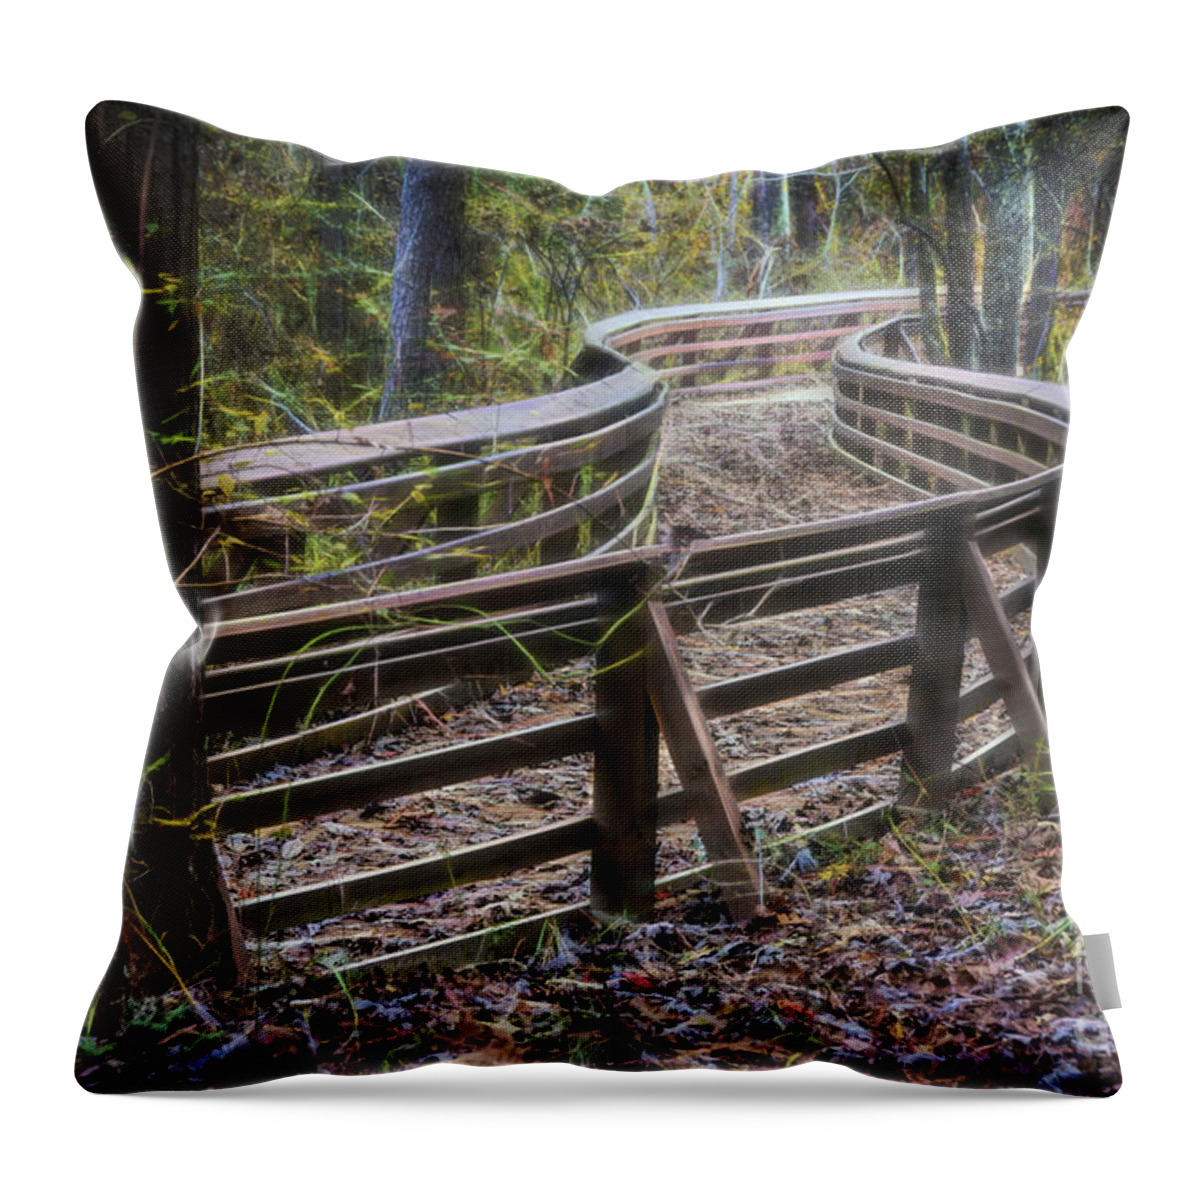 Pathway Throw Pillow featuring the photograph Through The Woods by Ken Johnson